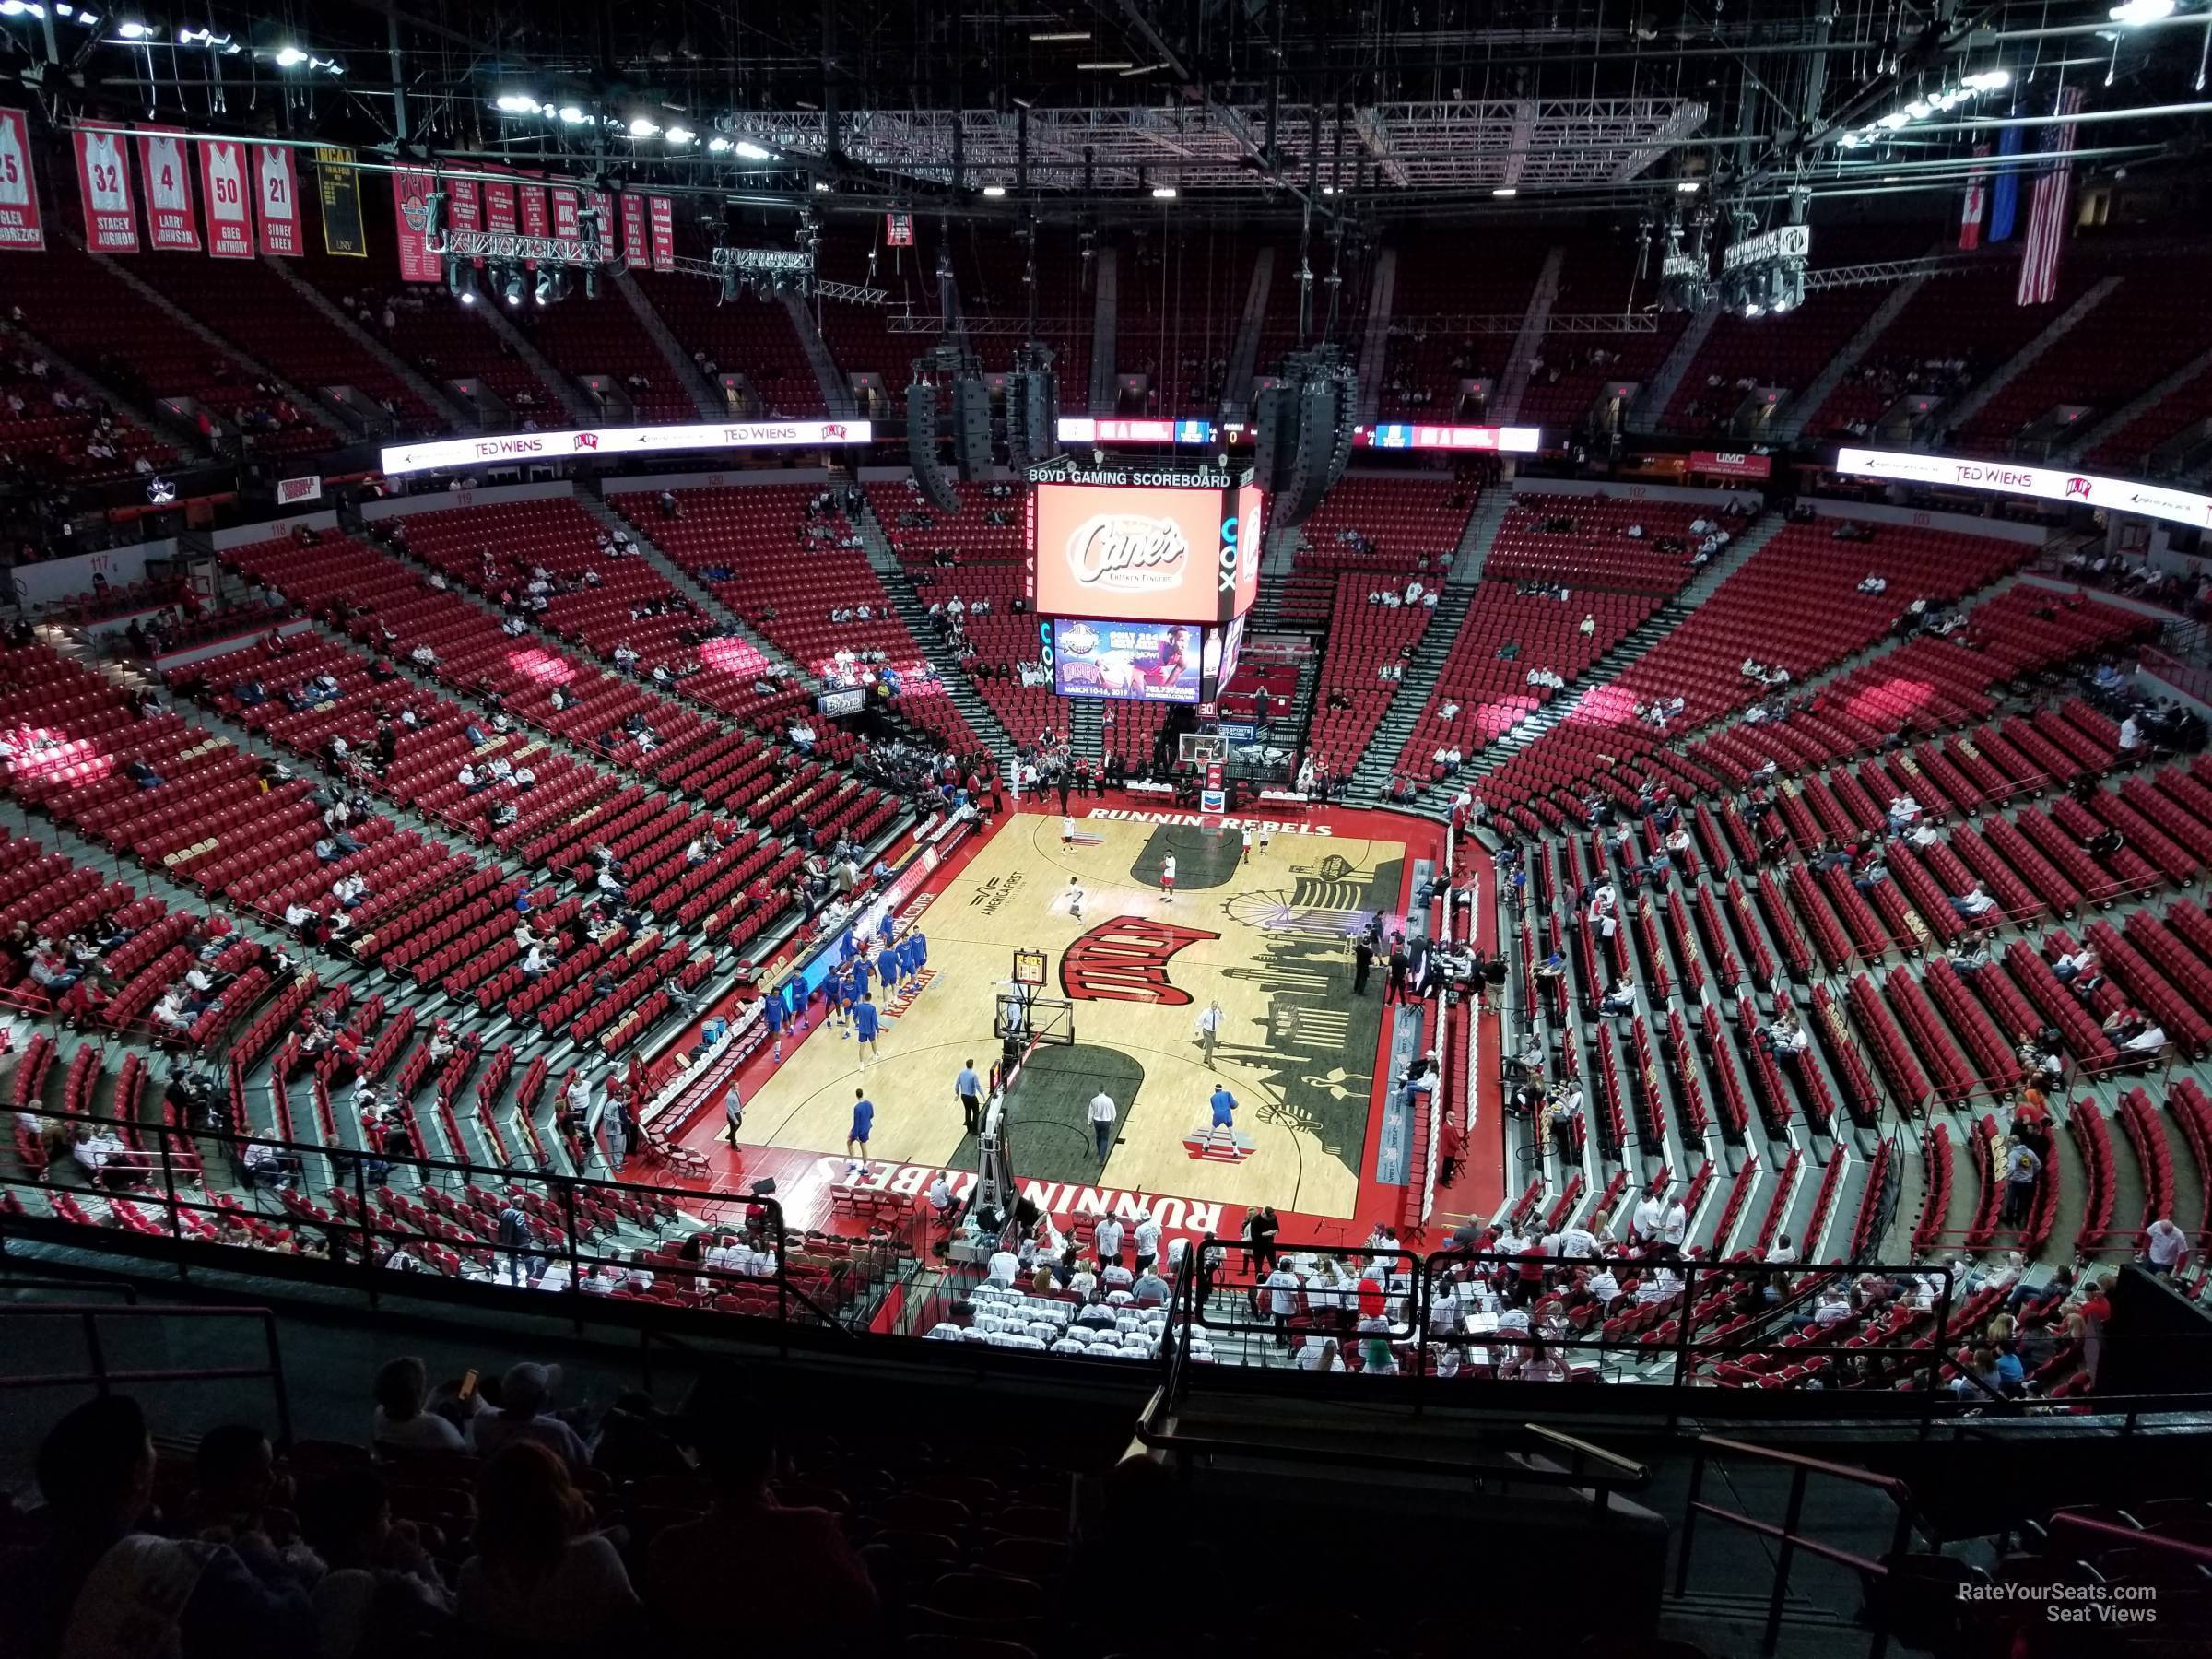 section 217, row l seat view  - thomas and mack center